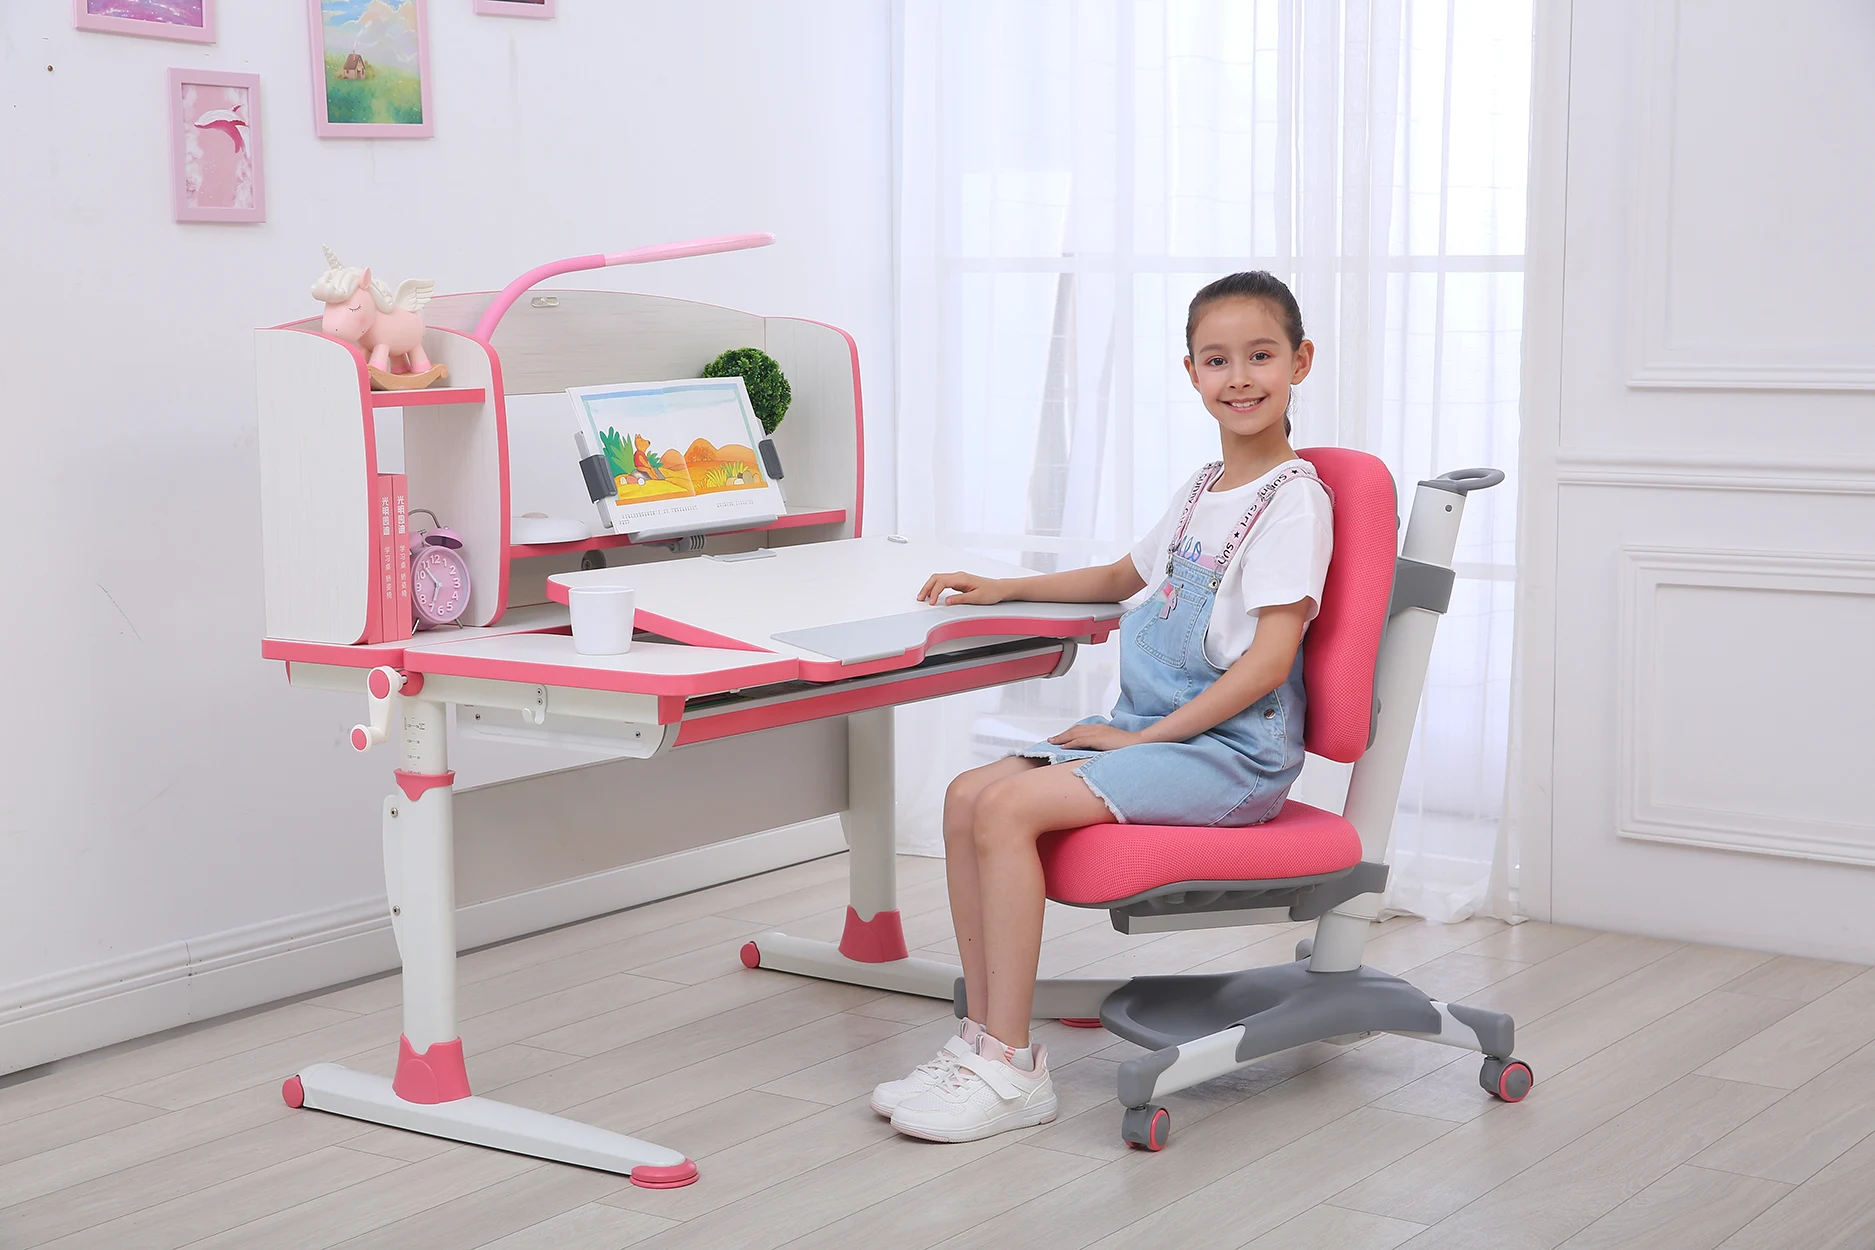 
Kid Srite Kid Study Table and Chair Children Study Table 